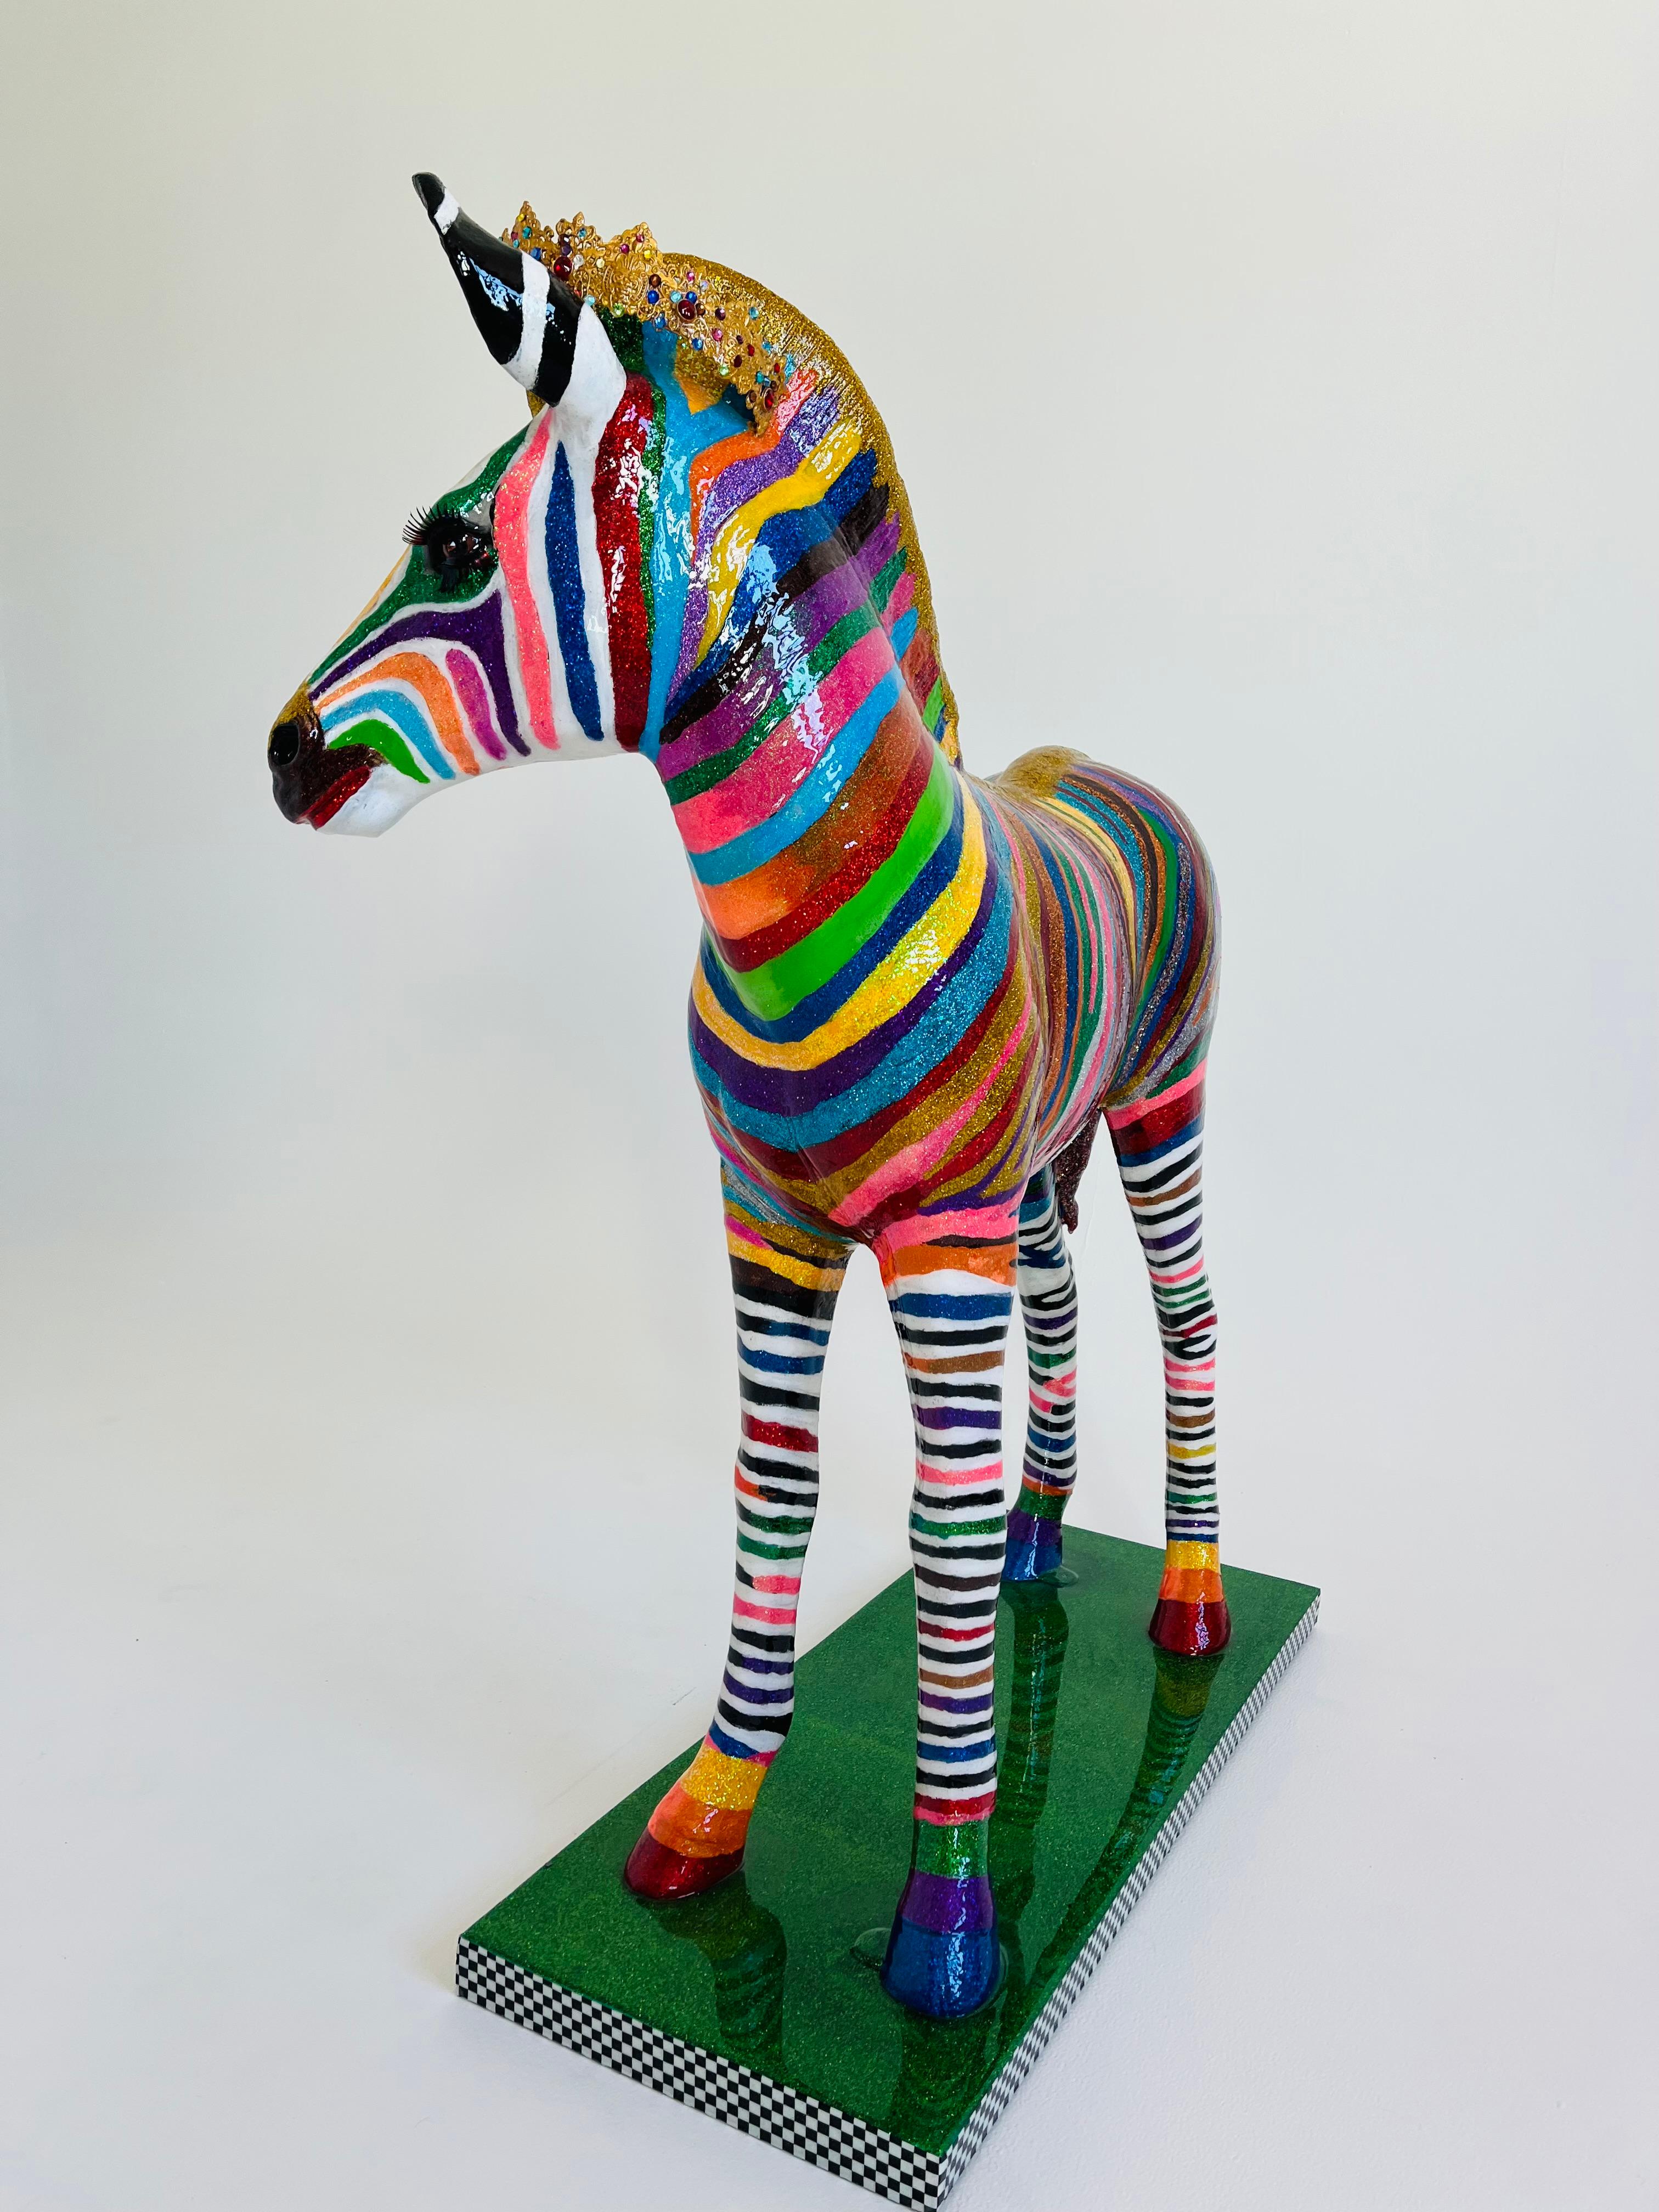               **ANNUAL SUPER SALE UNTIL APRIL 15TH ONLY**
*This Price Won't Be Repeated Again This Year - Take Advantage Of It*

ZEZE: THE HERD CROW PRINCE (Portrait) is a very special ZEBRA sculpture: It took 3 months to be completed, being one of